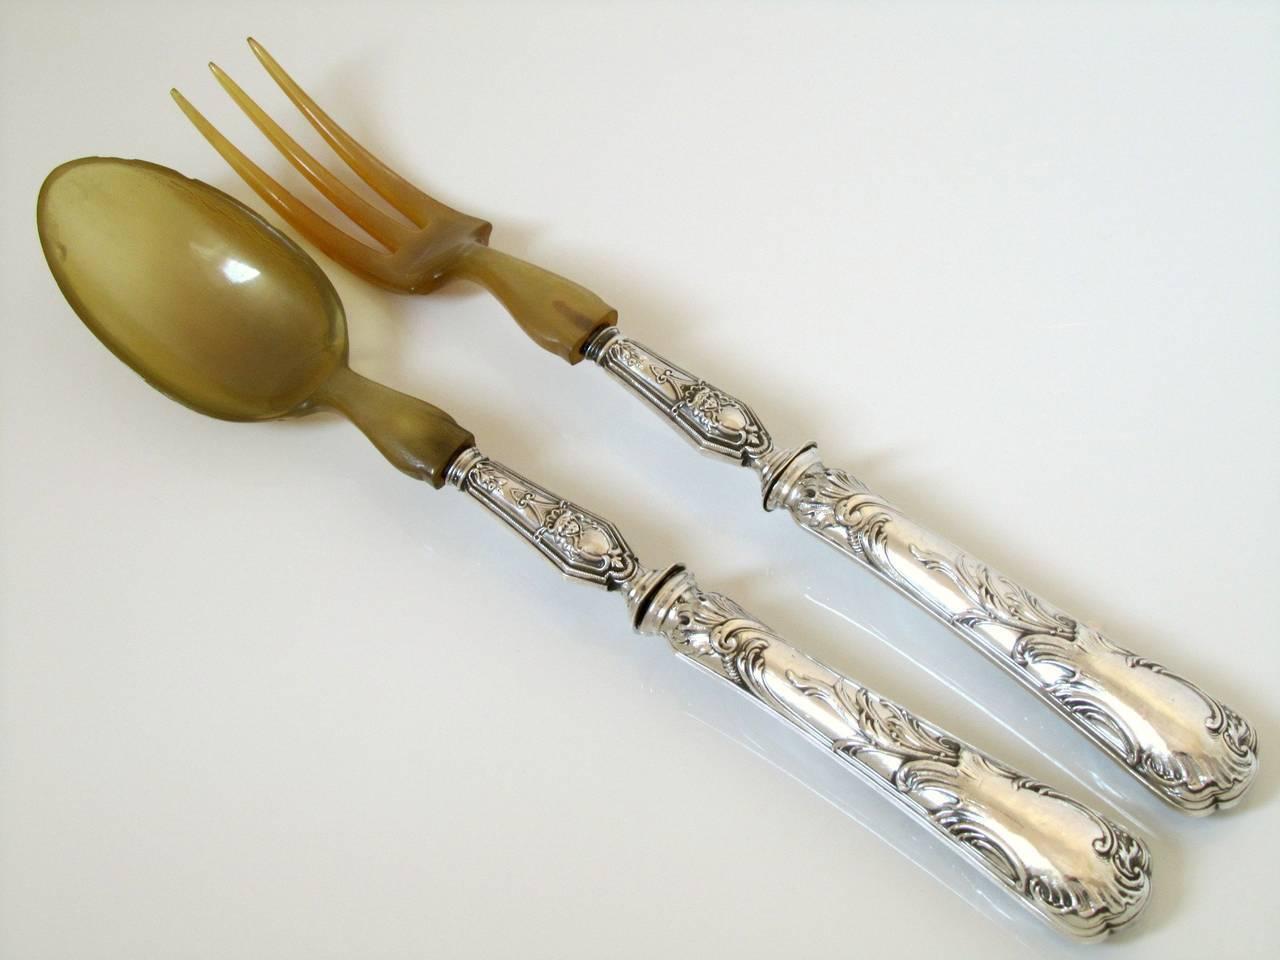 Gorgeous French Rococo Sterling Silver Salad Serving Carving Set 4 Pc with Box For Sale 2